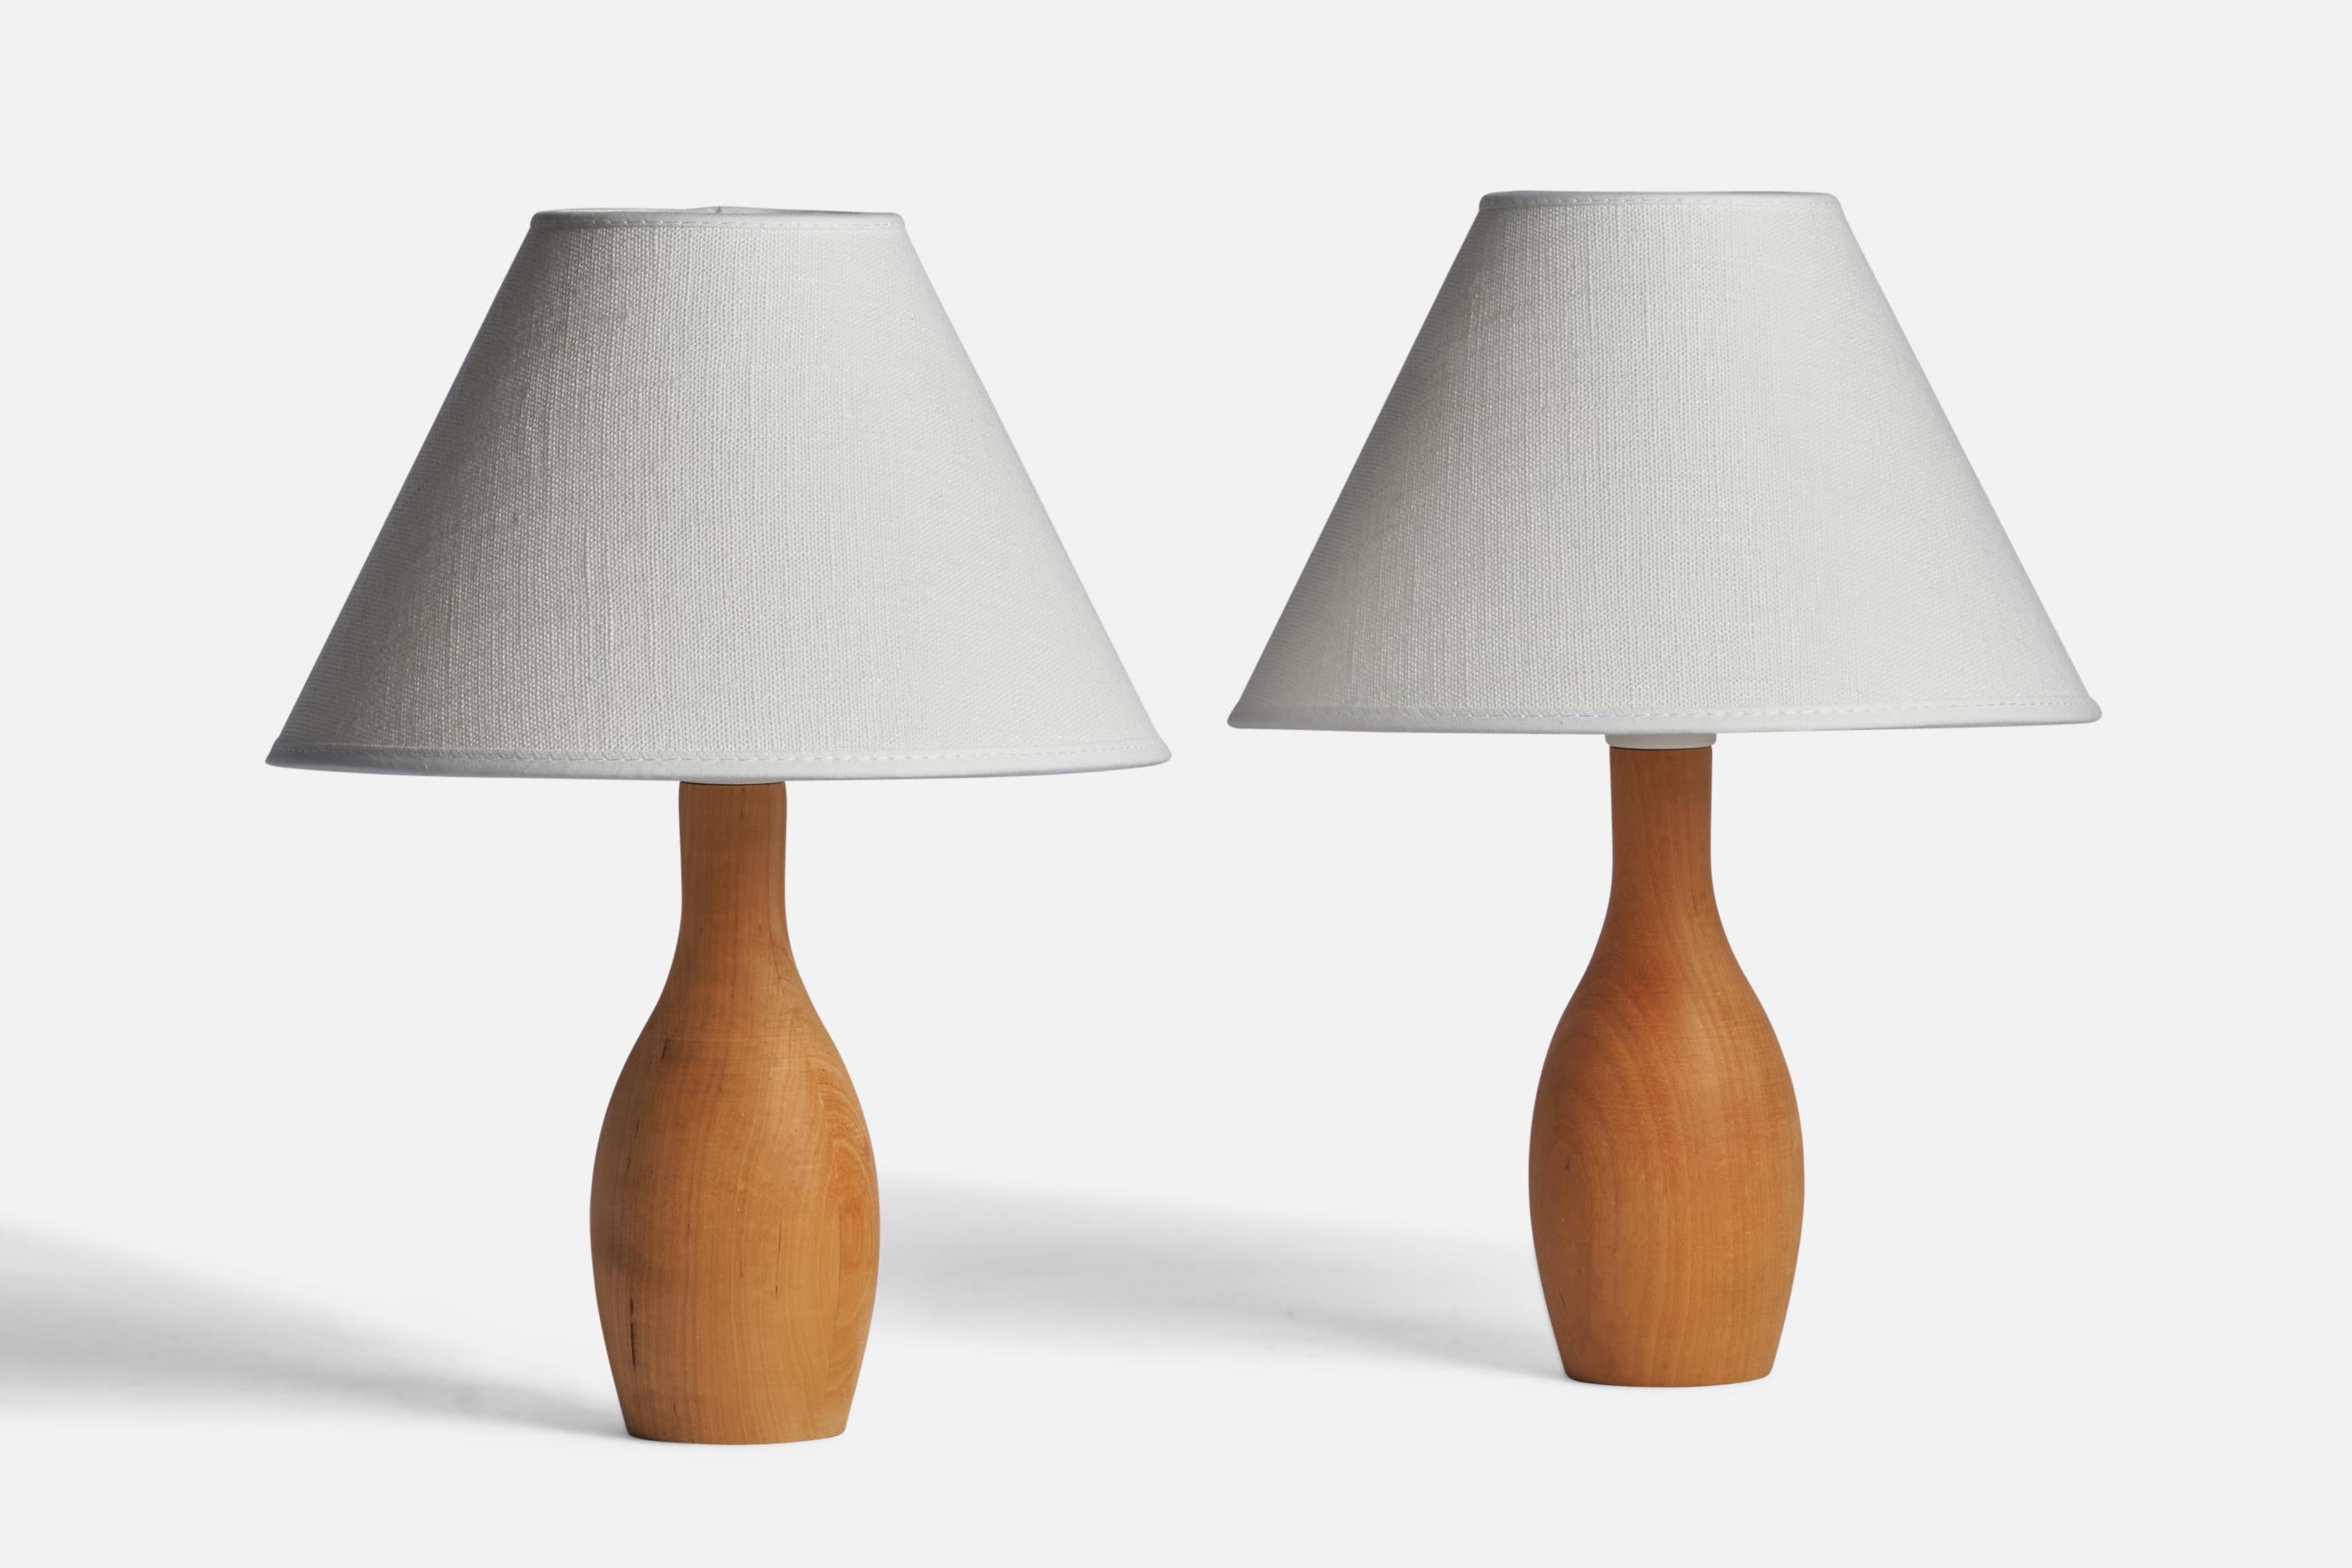 A pair of small oak table lamps designed and produced in Sweden, 1970s.

Dimensions of Lamp (inches): 8.25” H x 2.75” Diameter
Dimensions of Shade (inches): 3” Top Diameter x 8” Bottom Diameter x 5.4” H
Dimensions of Lamp with Shade (inches): 11” H